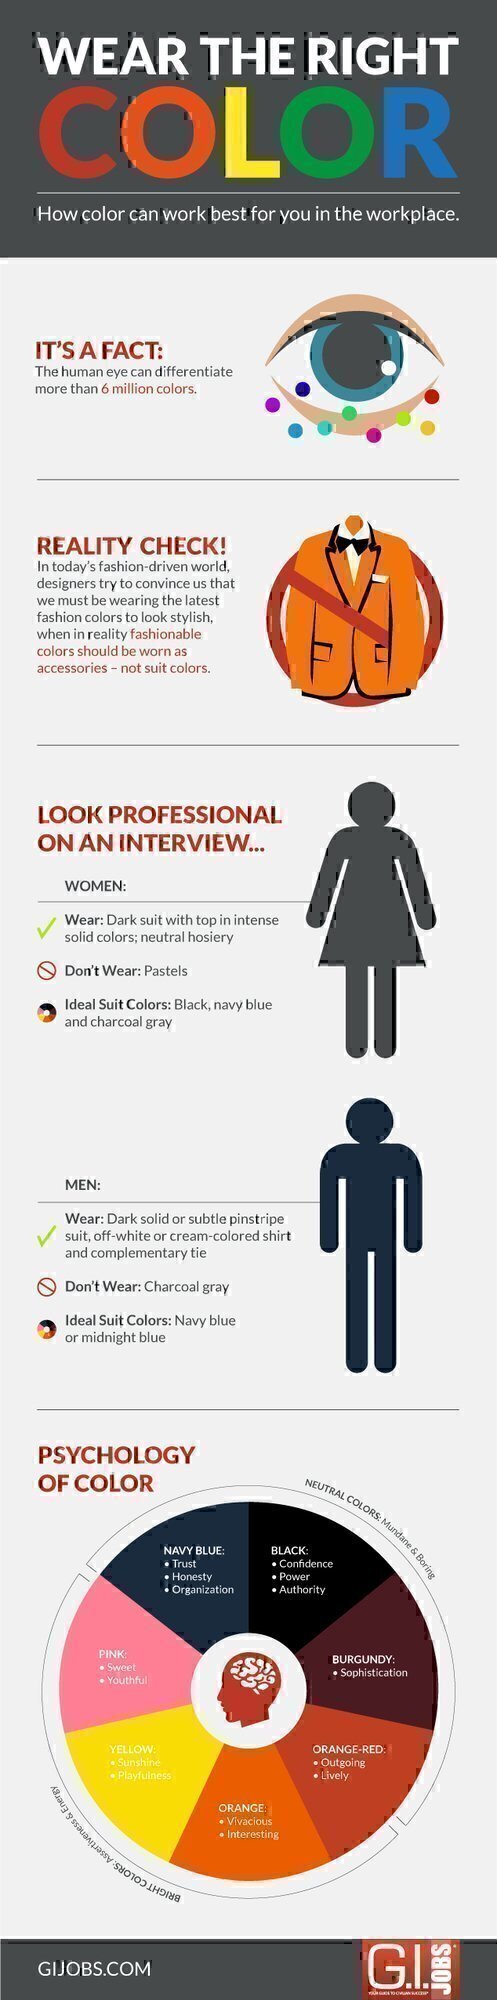 Infographic detailing how to wear the right color for an interview.